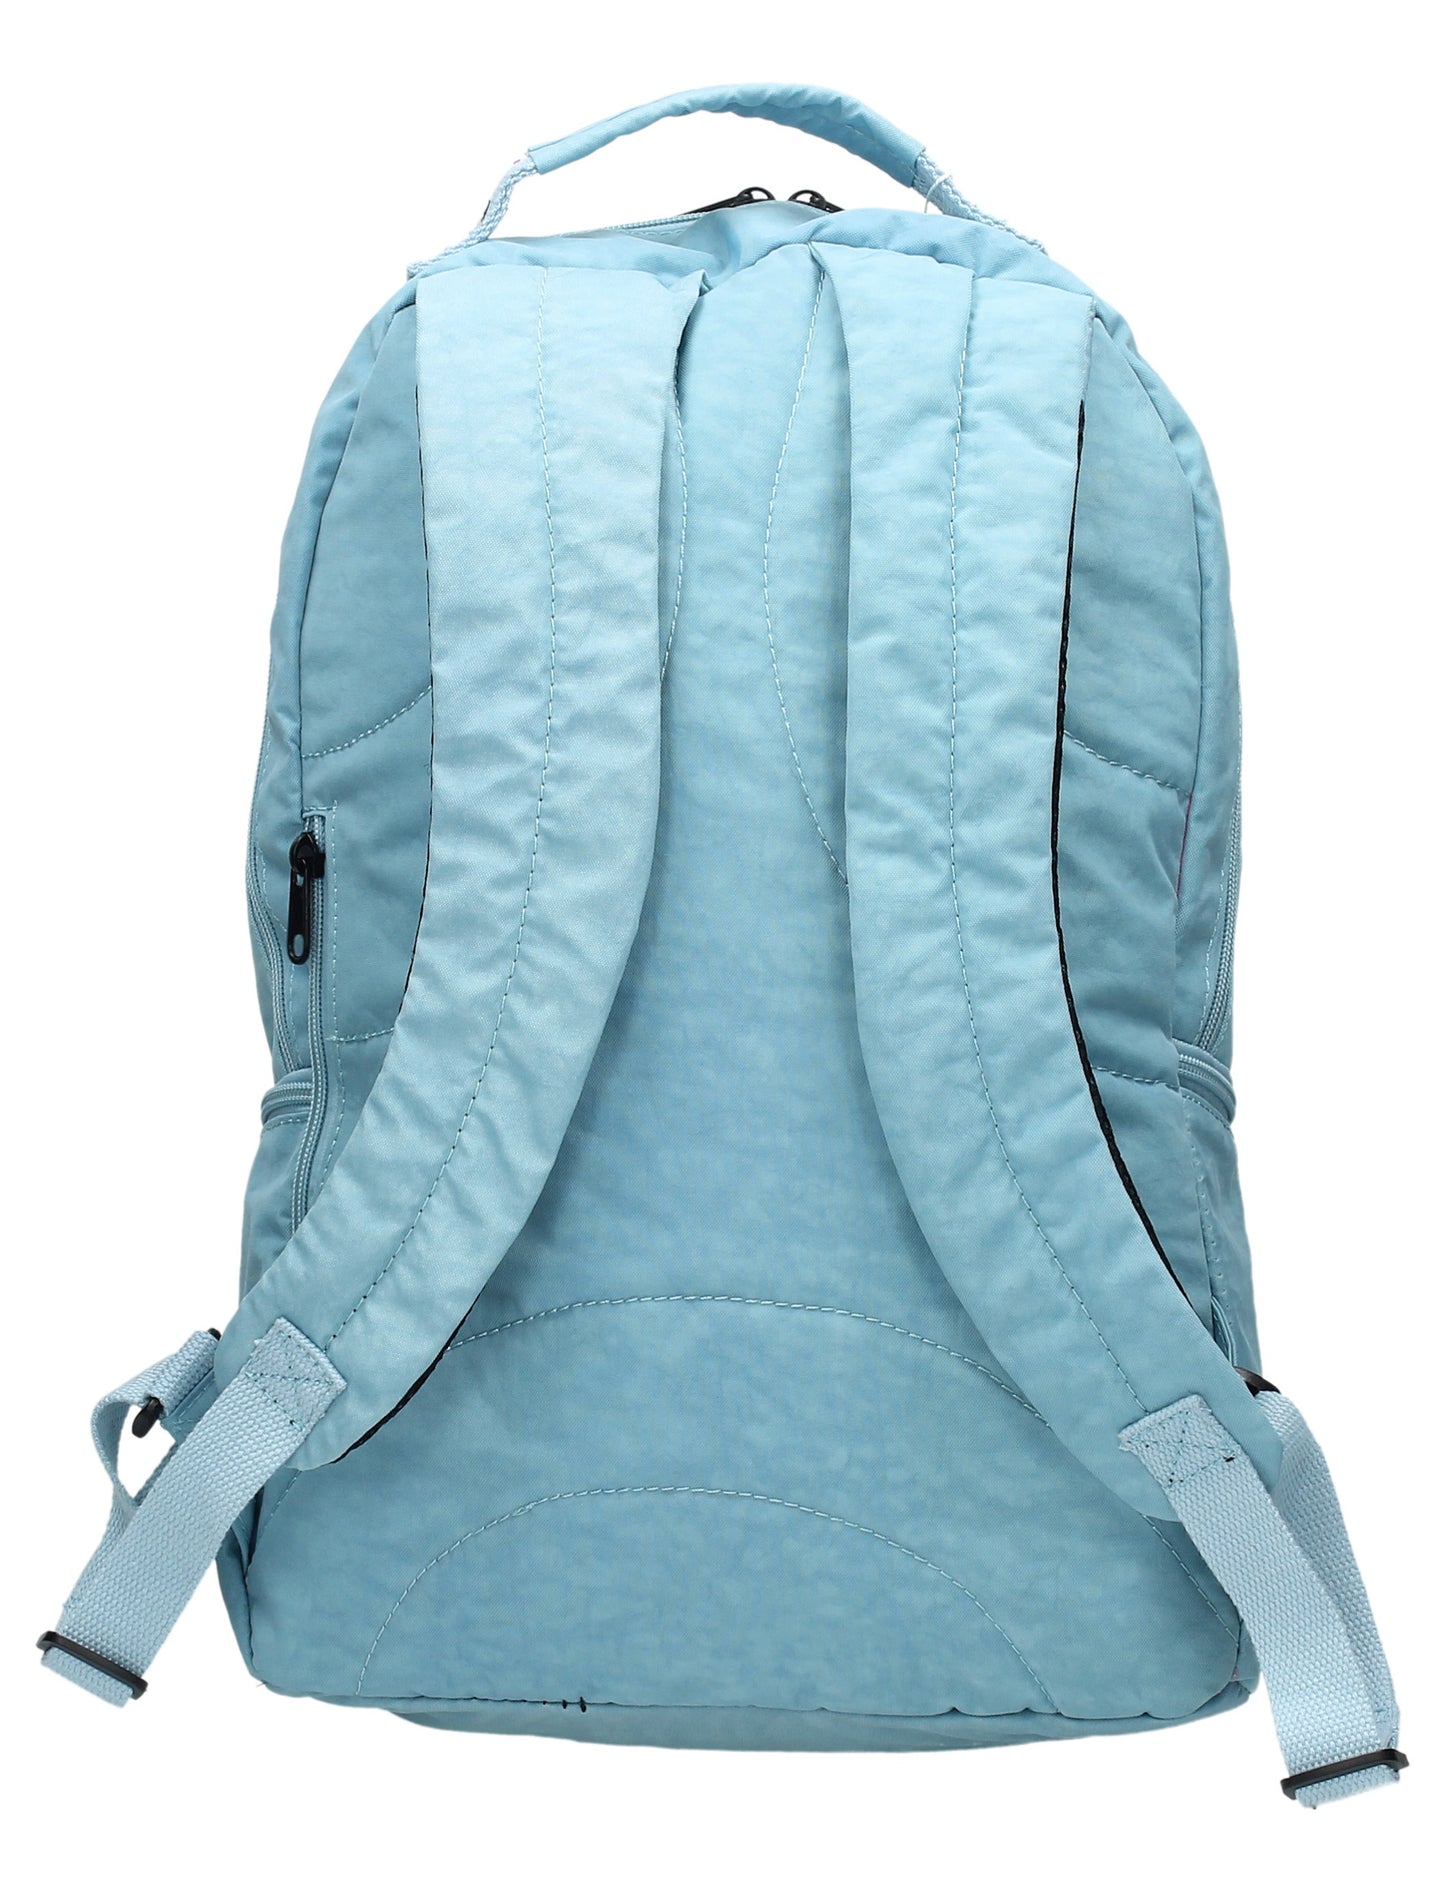 Joseph & Mary Baby Changing Backpack - Light Blue-Baby Changing-SWANKYSWANS